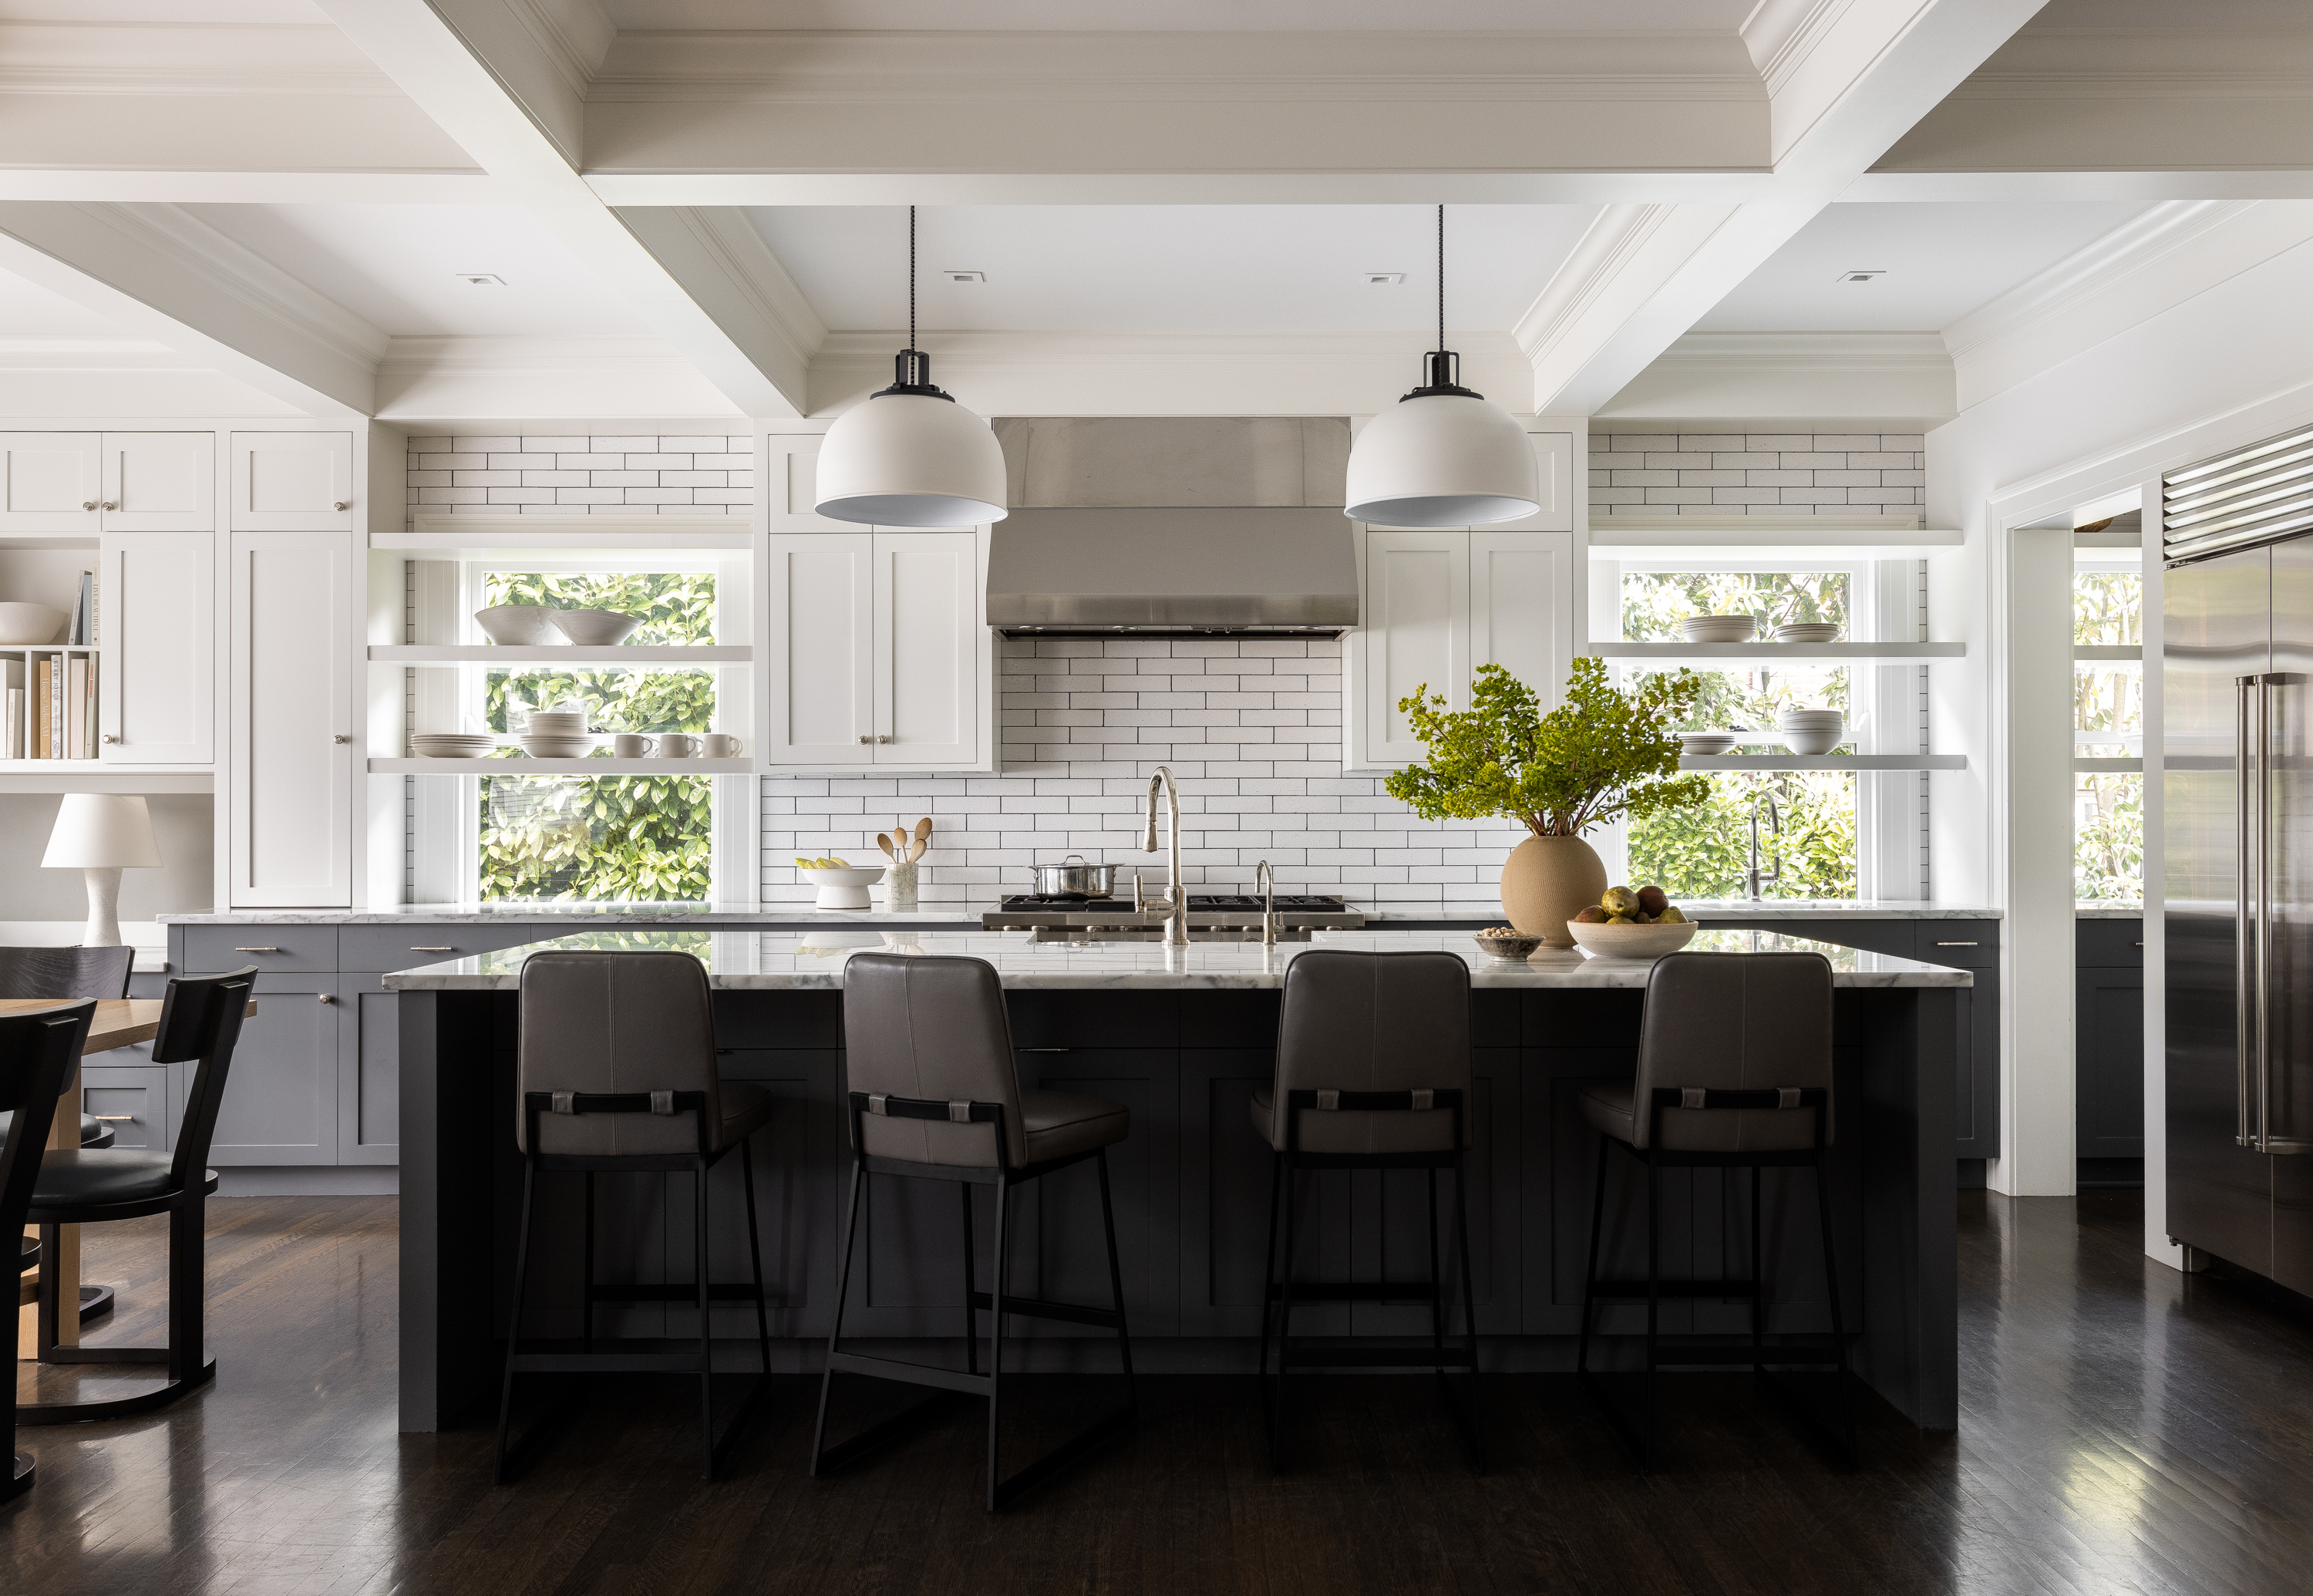 High Contrast Kitchen, featuring natural light and open shelving.